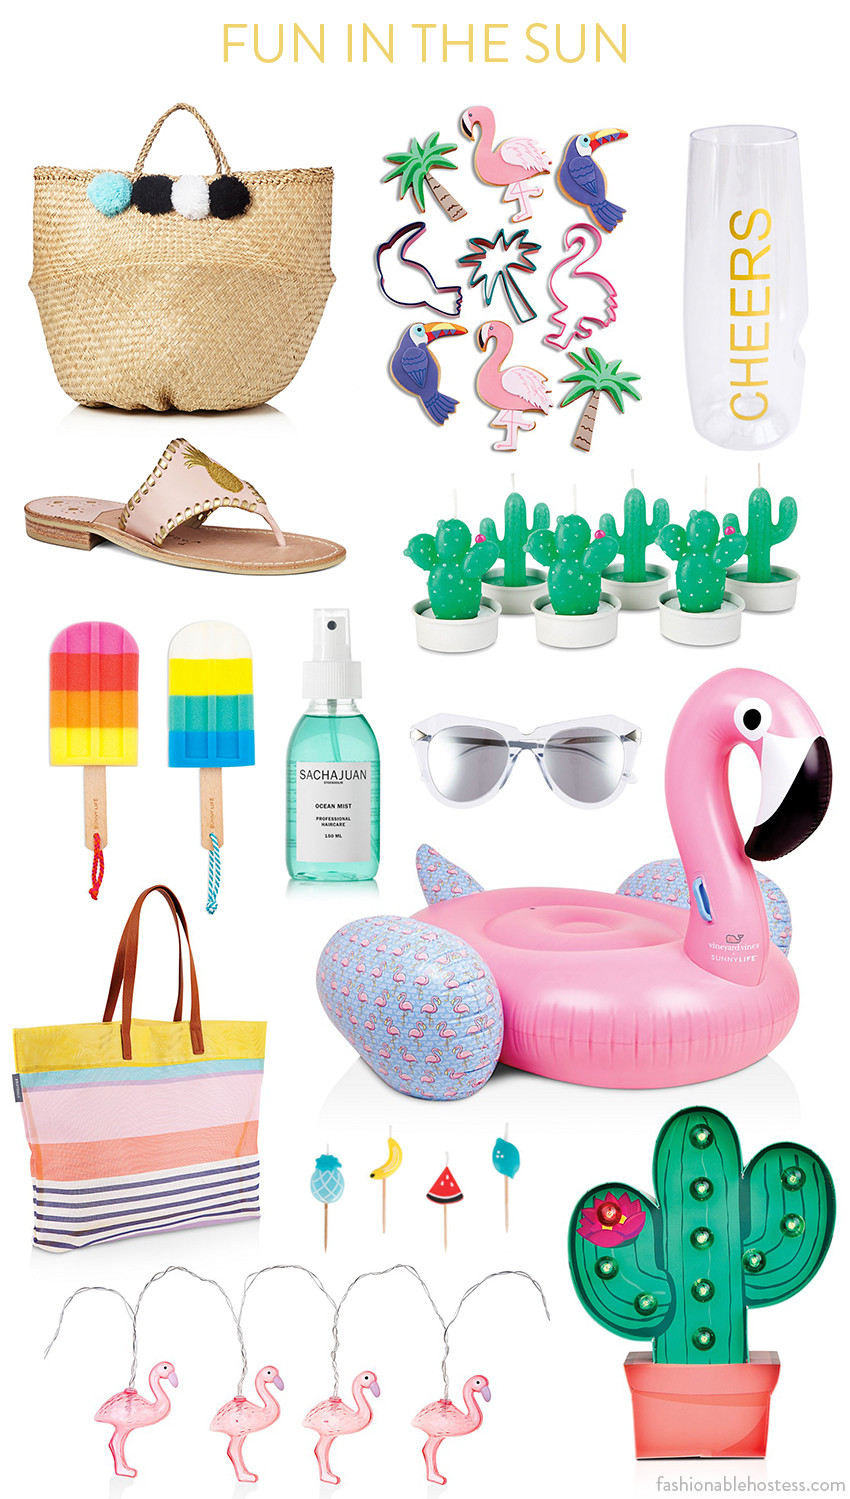 Pool Party Hostess Gift Ideas
 Host the Prettiest Pool Party